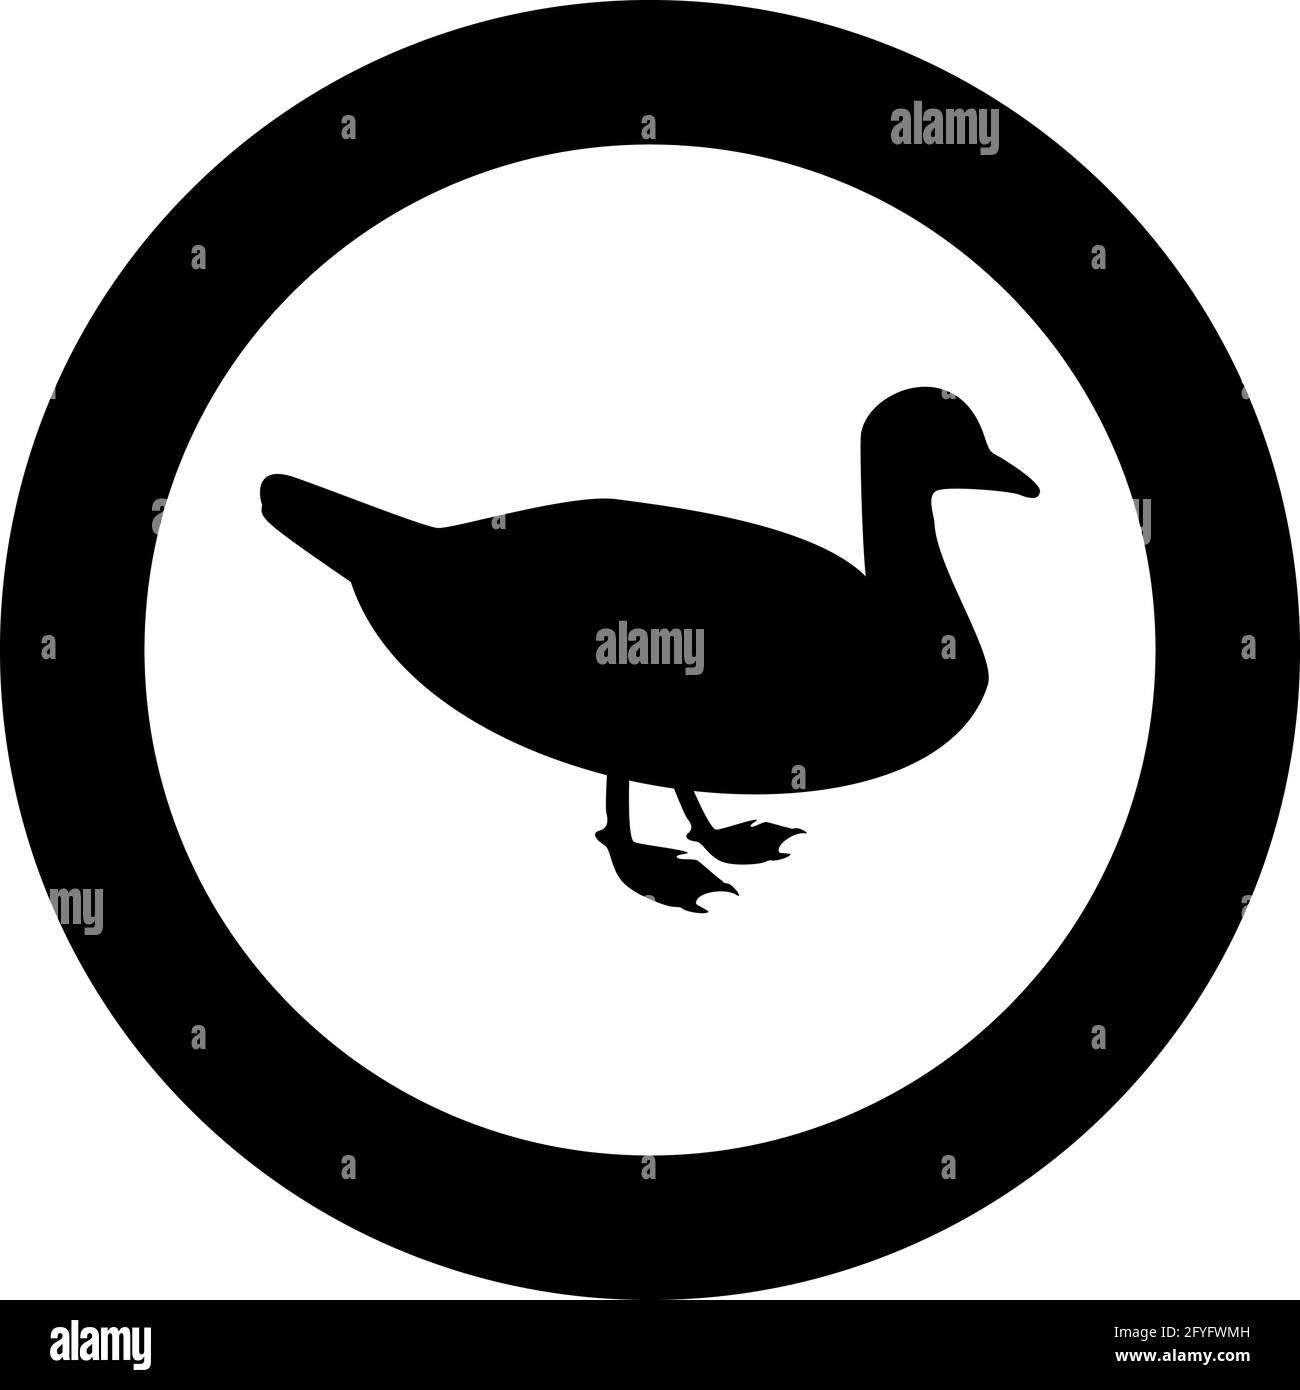 Duck Male mallard Bird Waterbird Waterfowl Poultry Fowl Canard silhouette in circle round black color vector illustration solid outline style simple Stock Vector